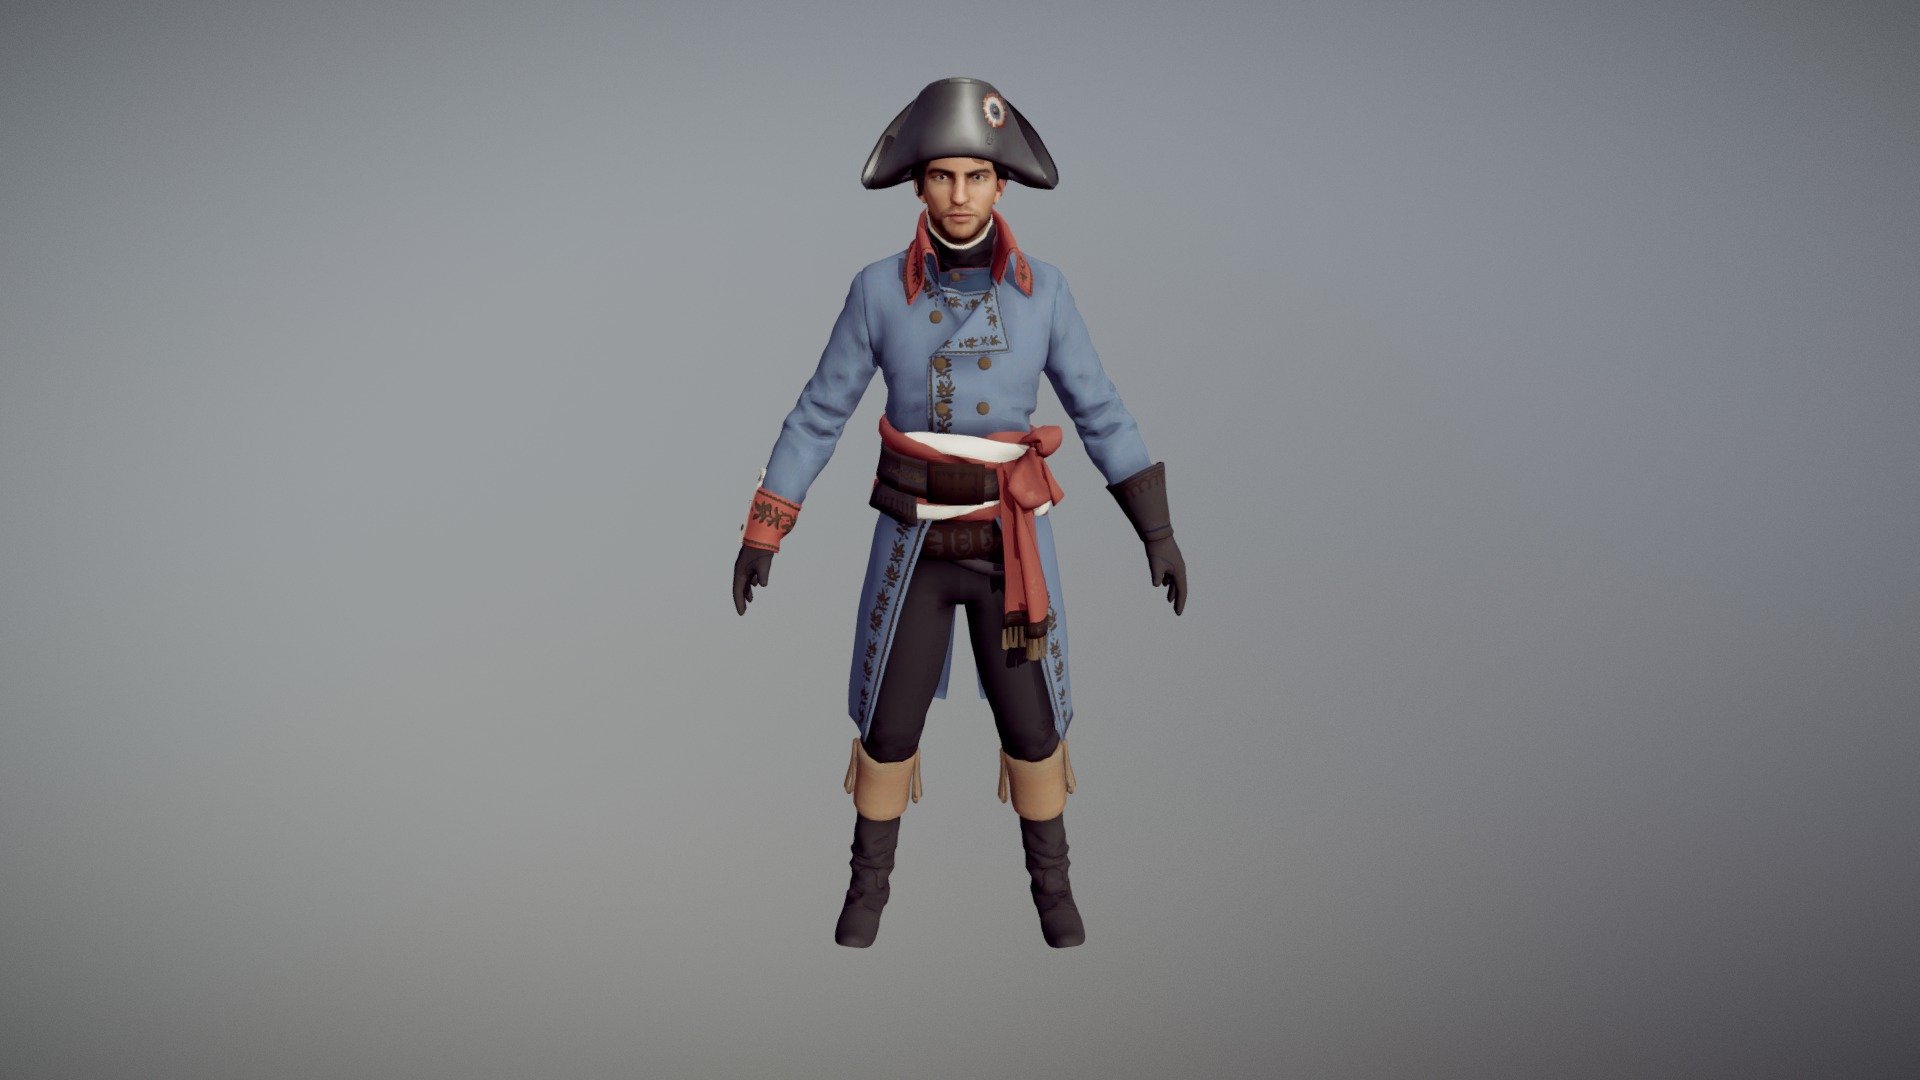 Napoleon outfit from Assassin's Creed Unity - Napoleon - 3D model by Sir Klutzy (@SirKlutzy) 3d model